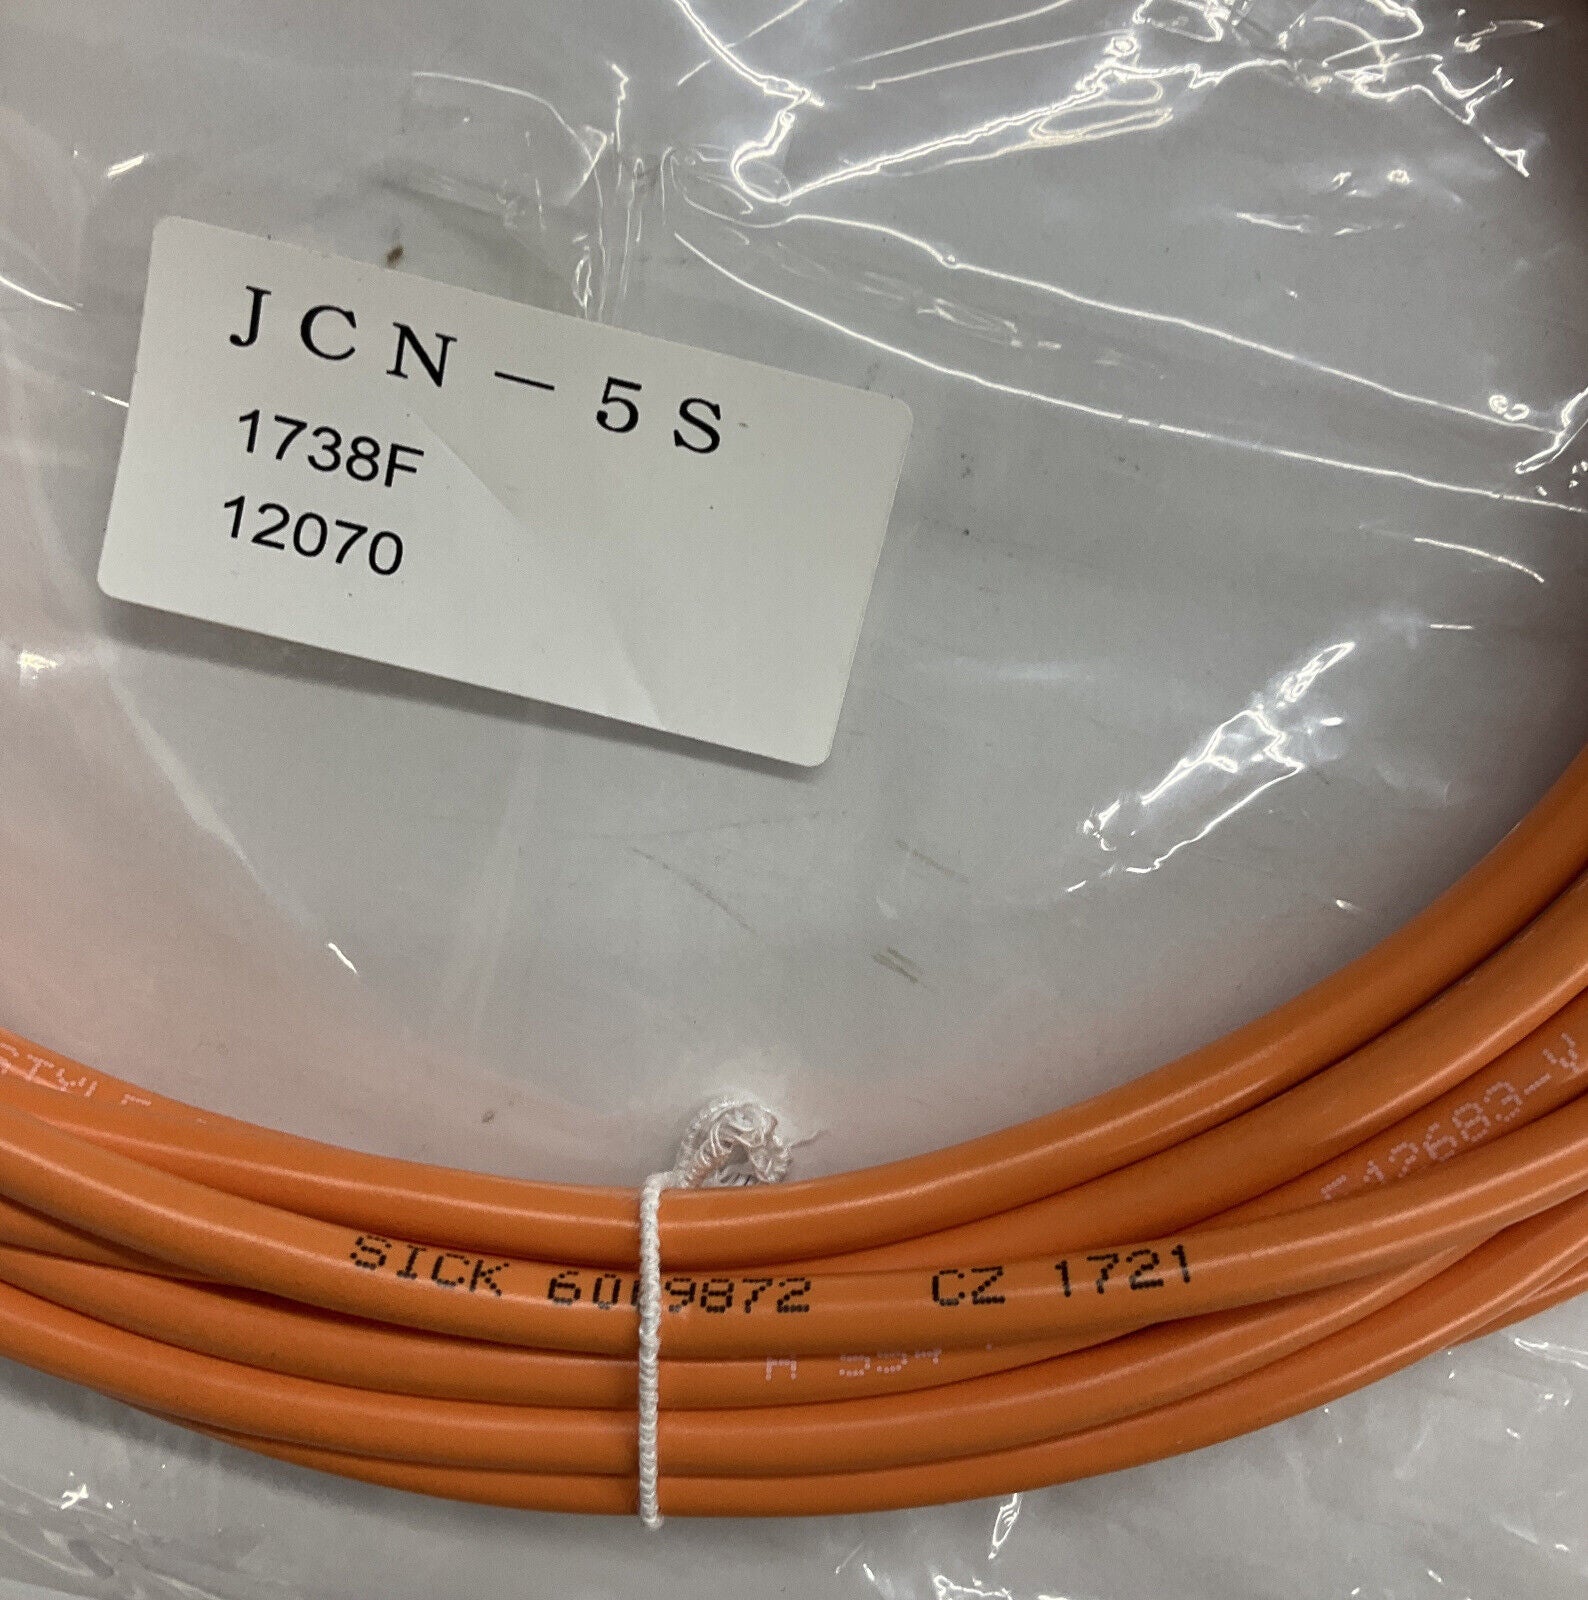 Sick JCN-5S 4-Pin Cable Cordset, 5 Meters M8 Female Straight Pigtail (CBL145)